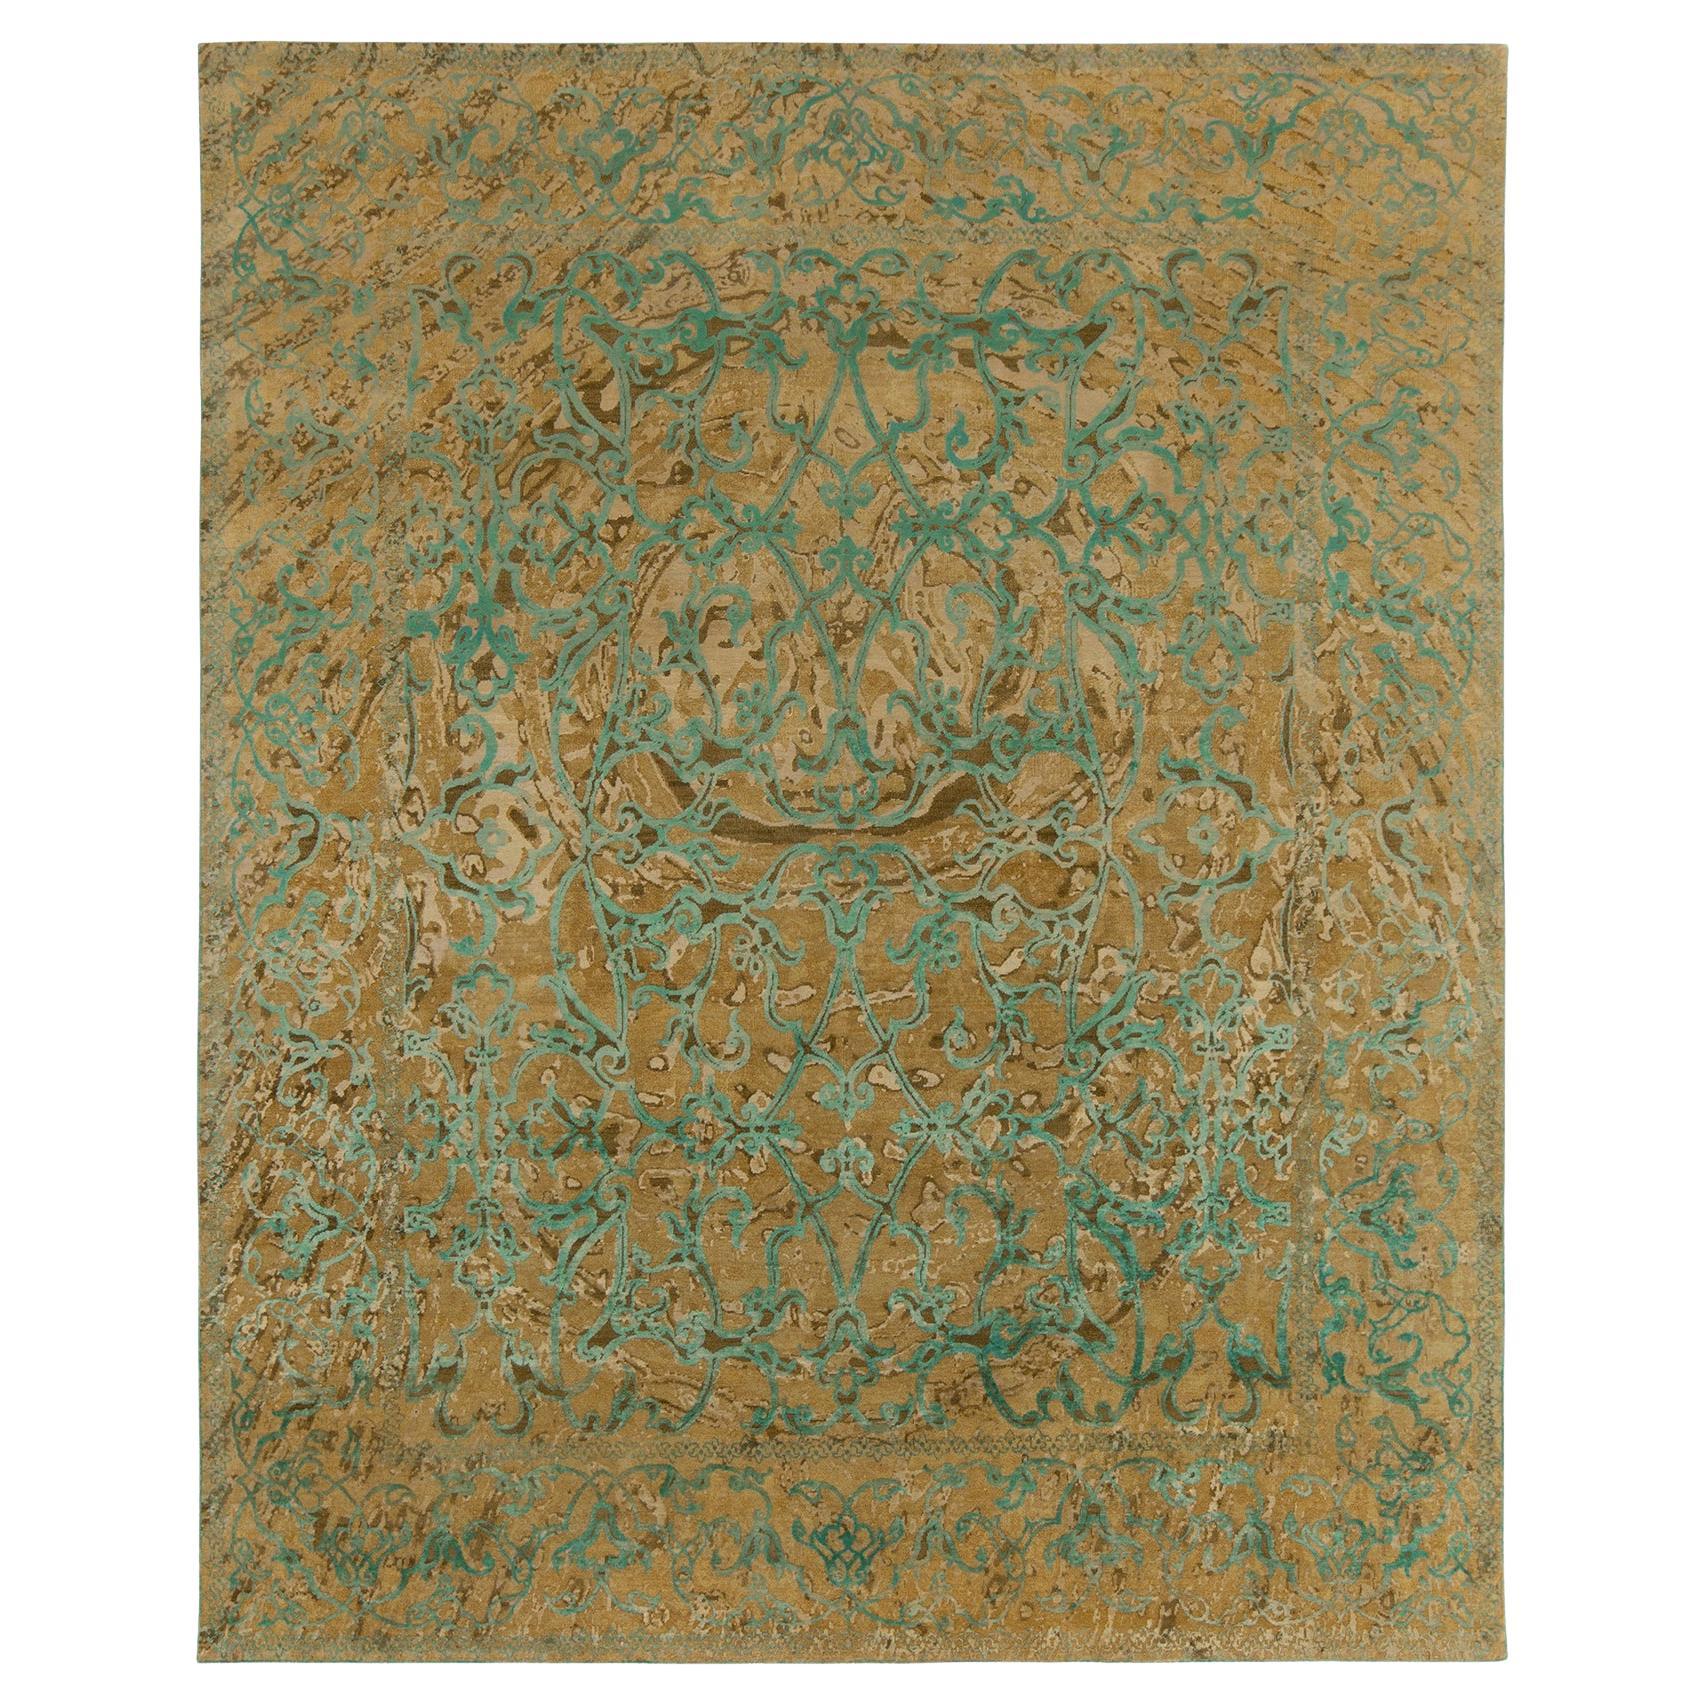 Rug & Kilim’s Modern rug in a Teal & Beige-Brown Abstract Geometric Pattern For Sale